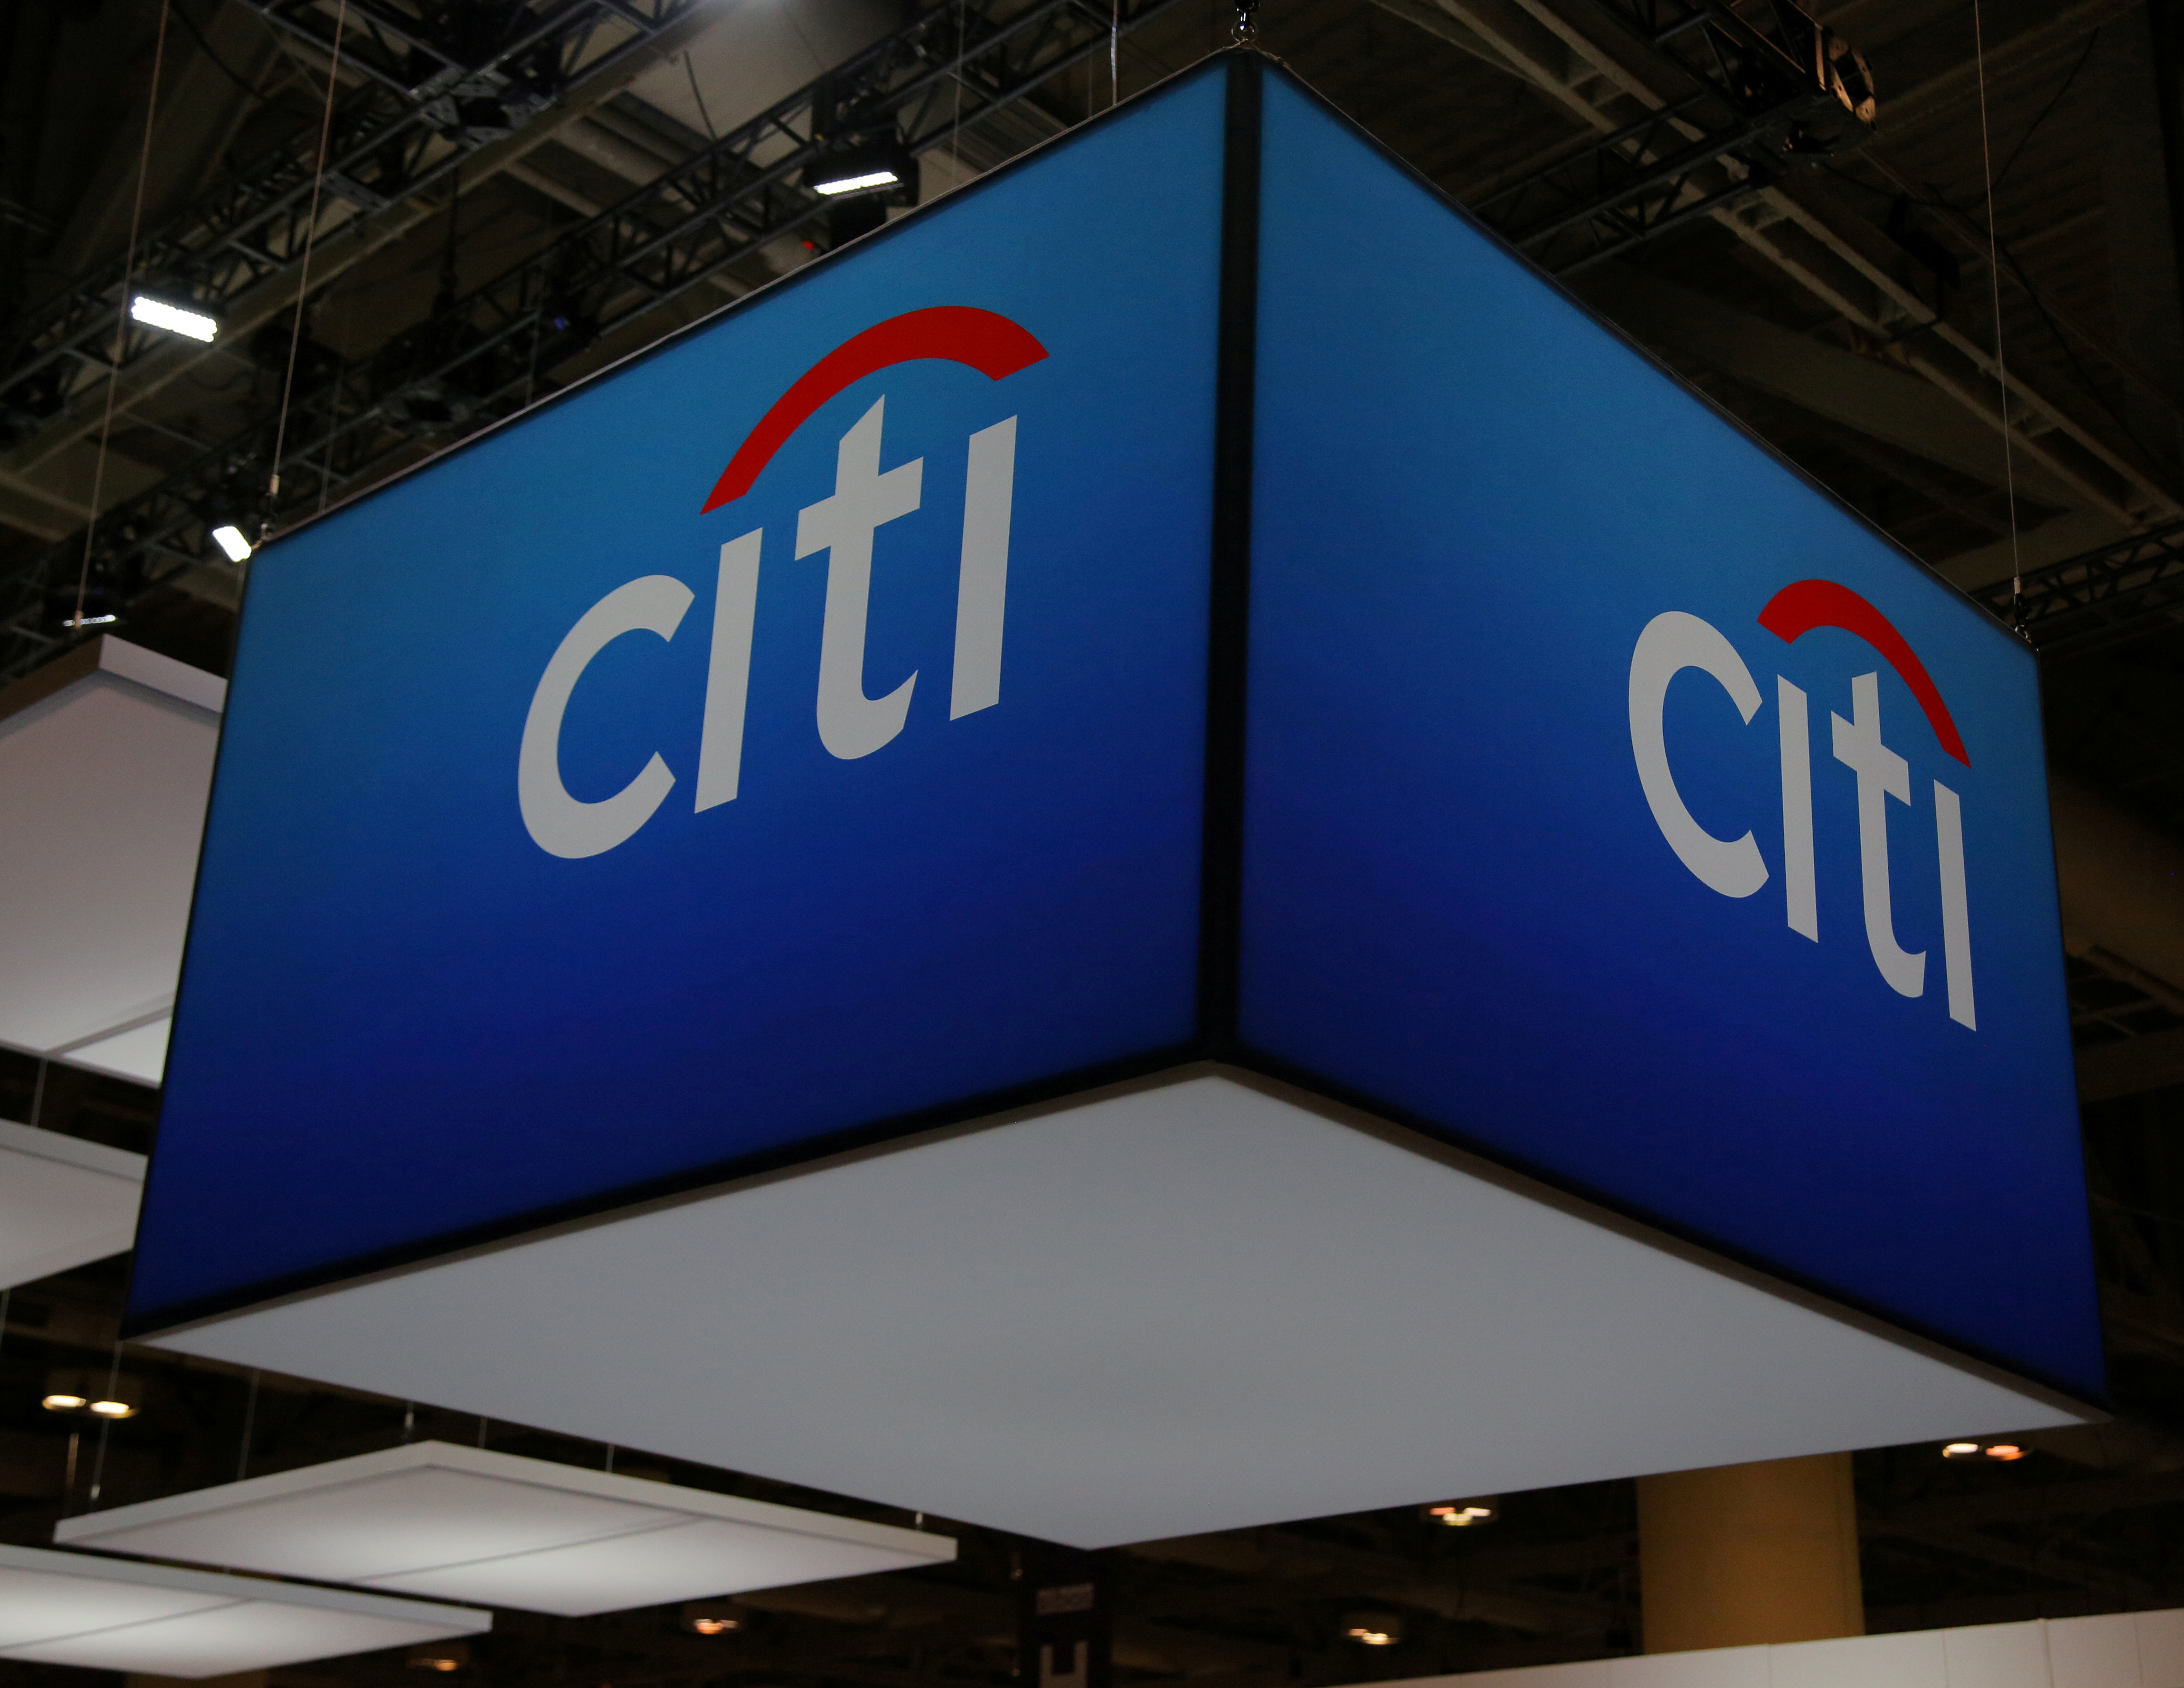 The Citigroup Inc logo is seen in Canada